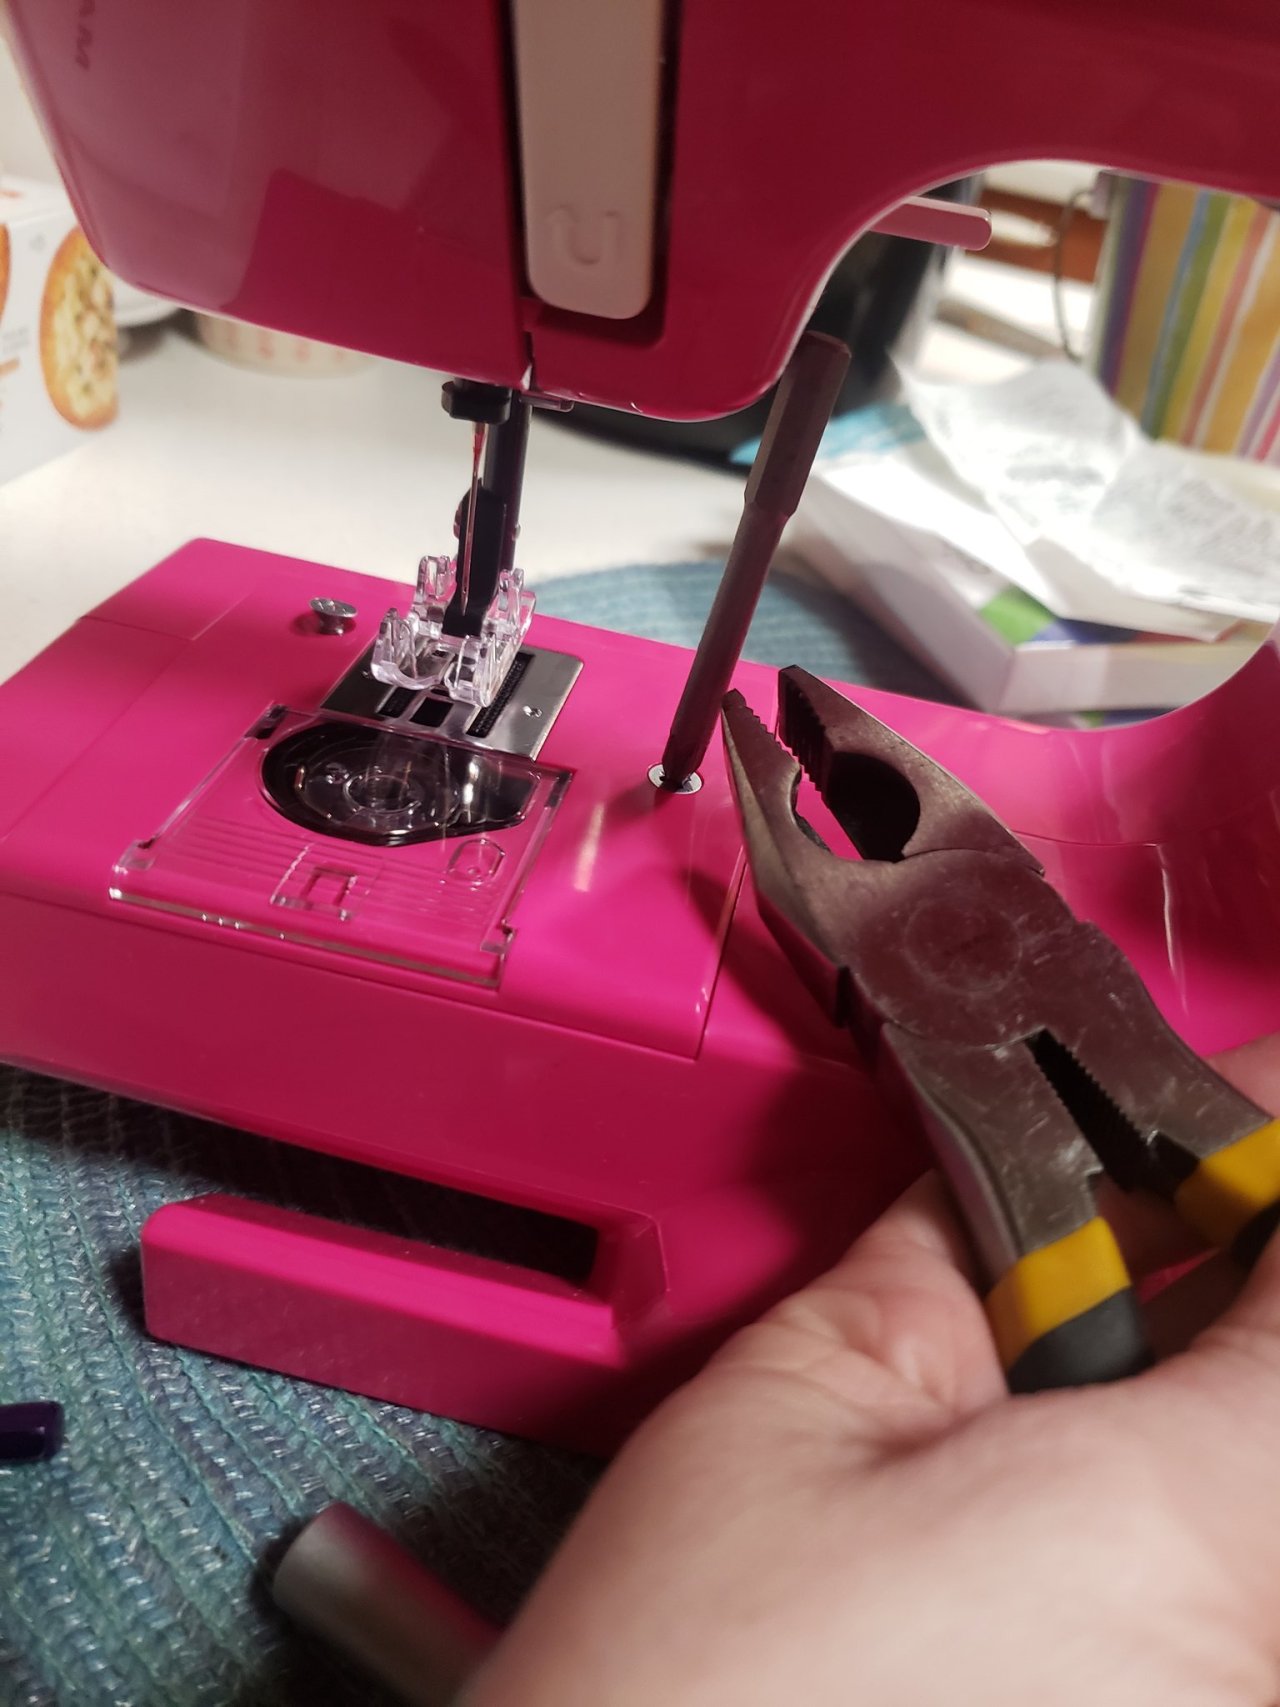 Janome 7025 sewing machine review - Gathered